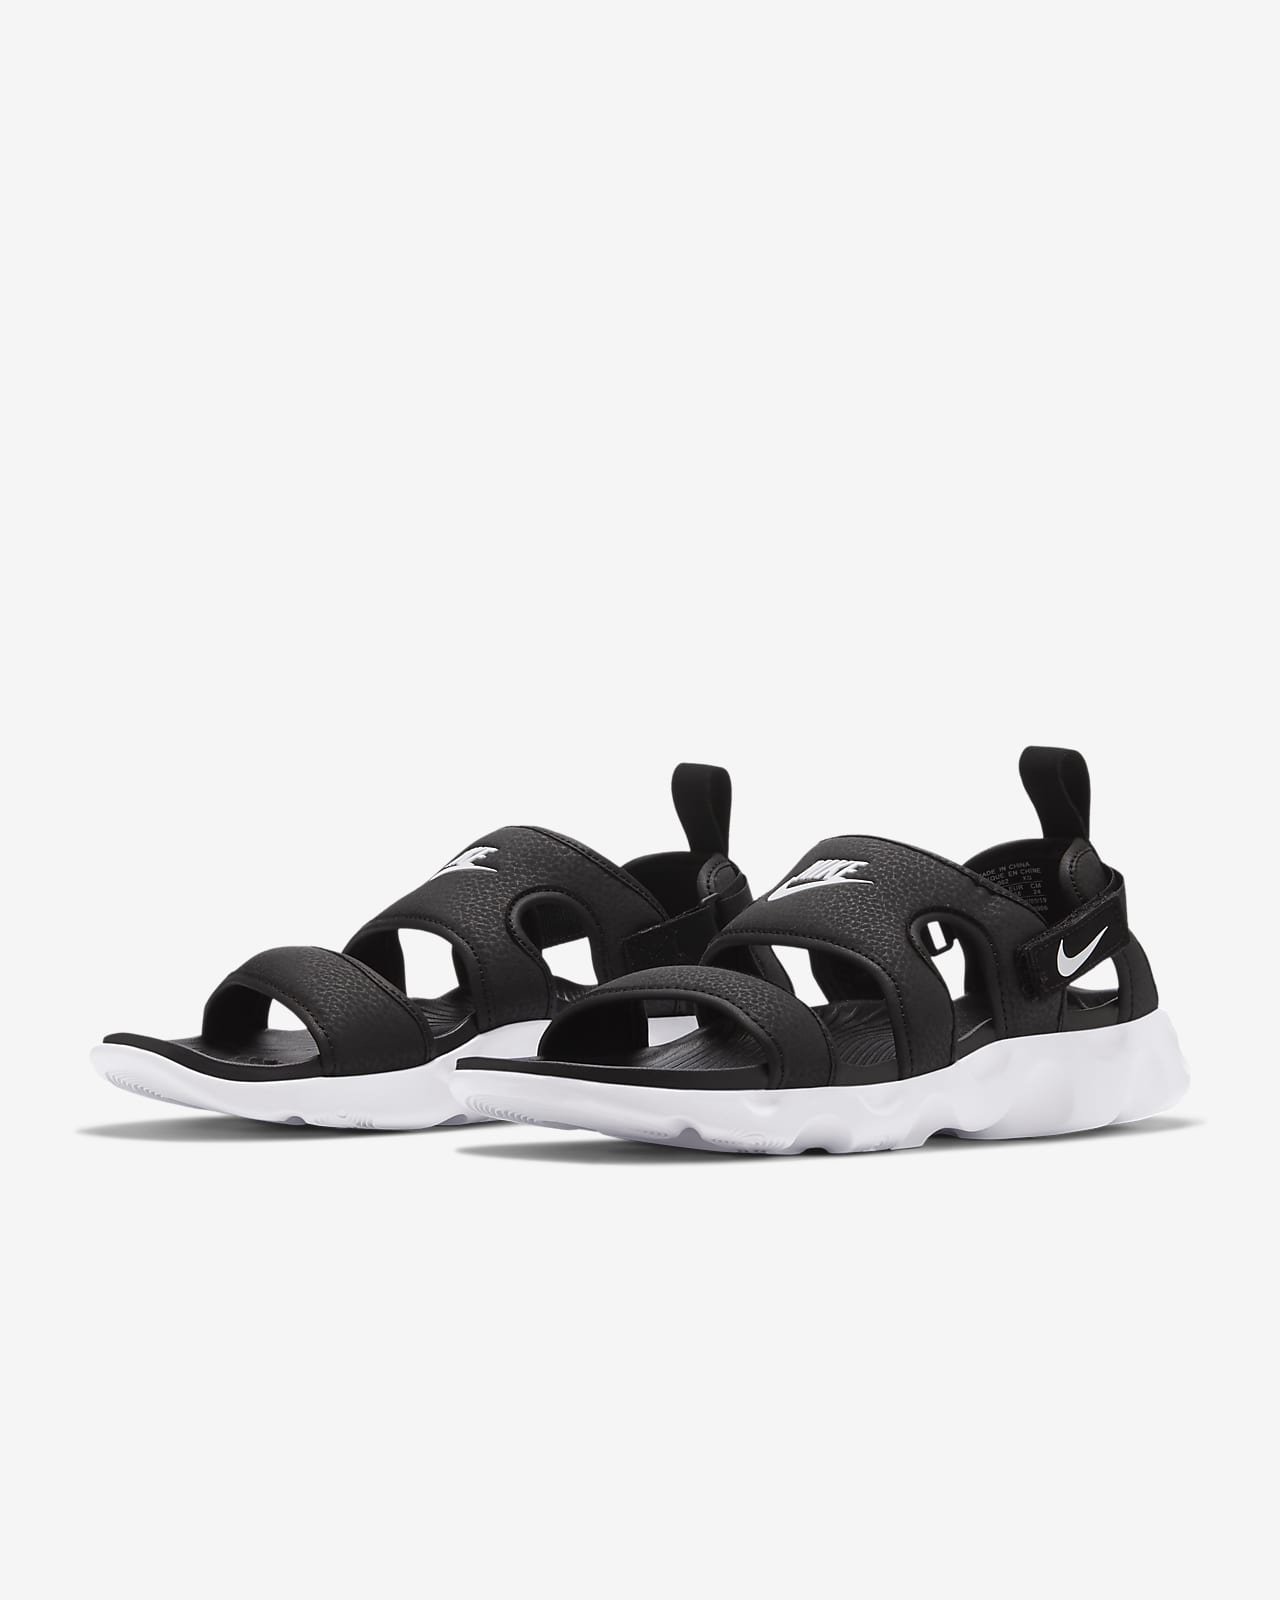 nike sandals womens with straps